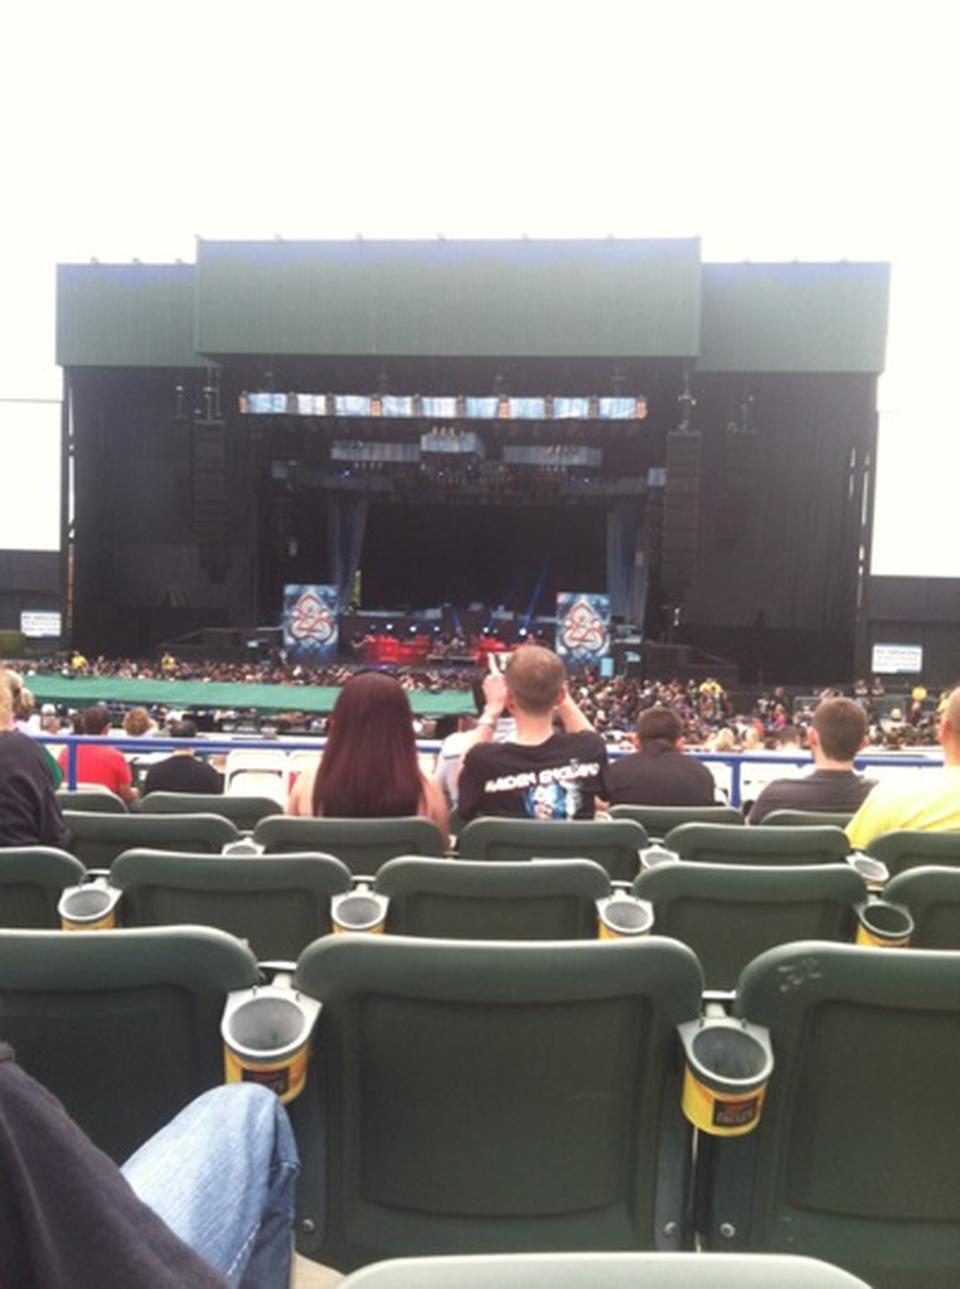 section 205 seat view  - toyota amphitheatre